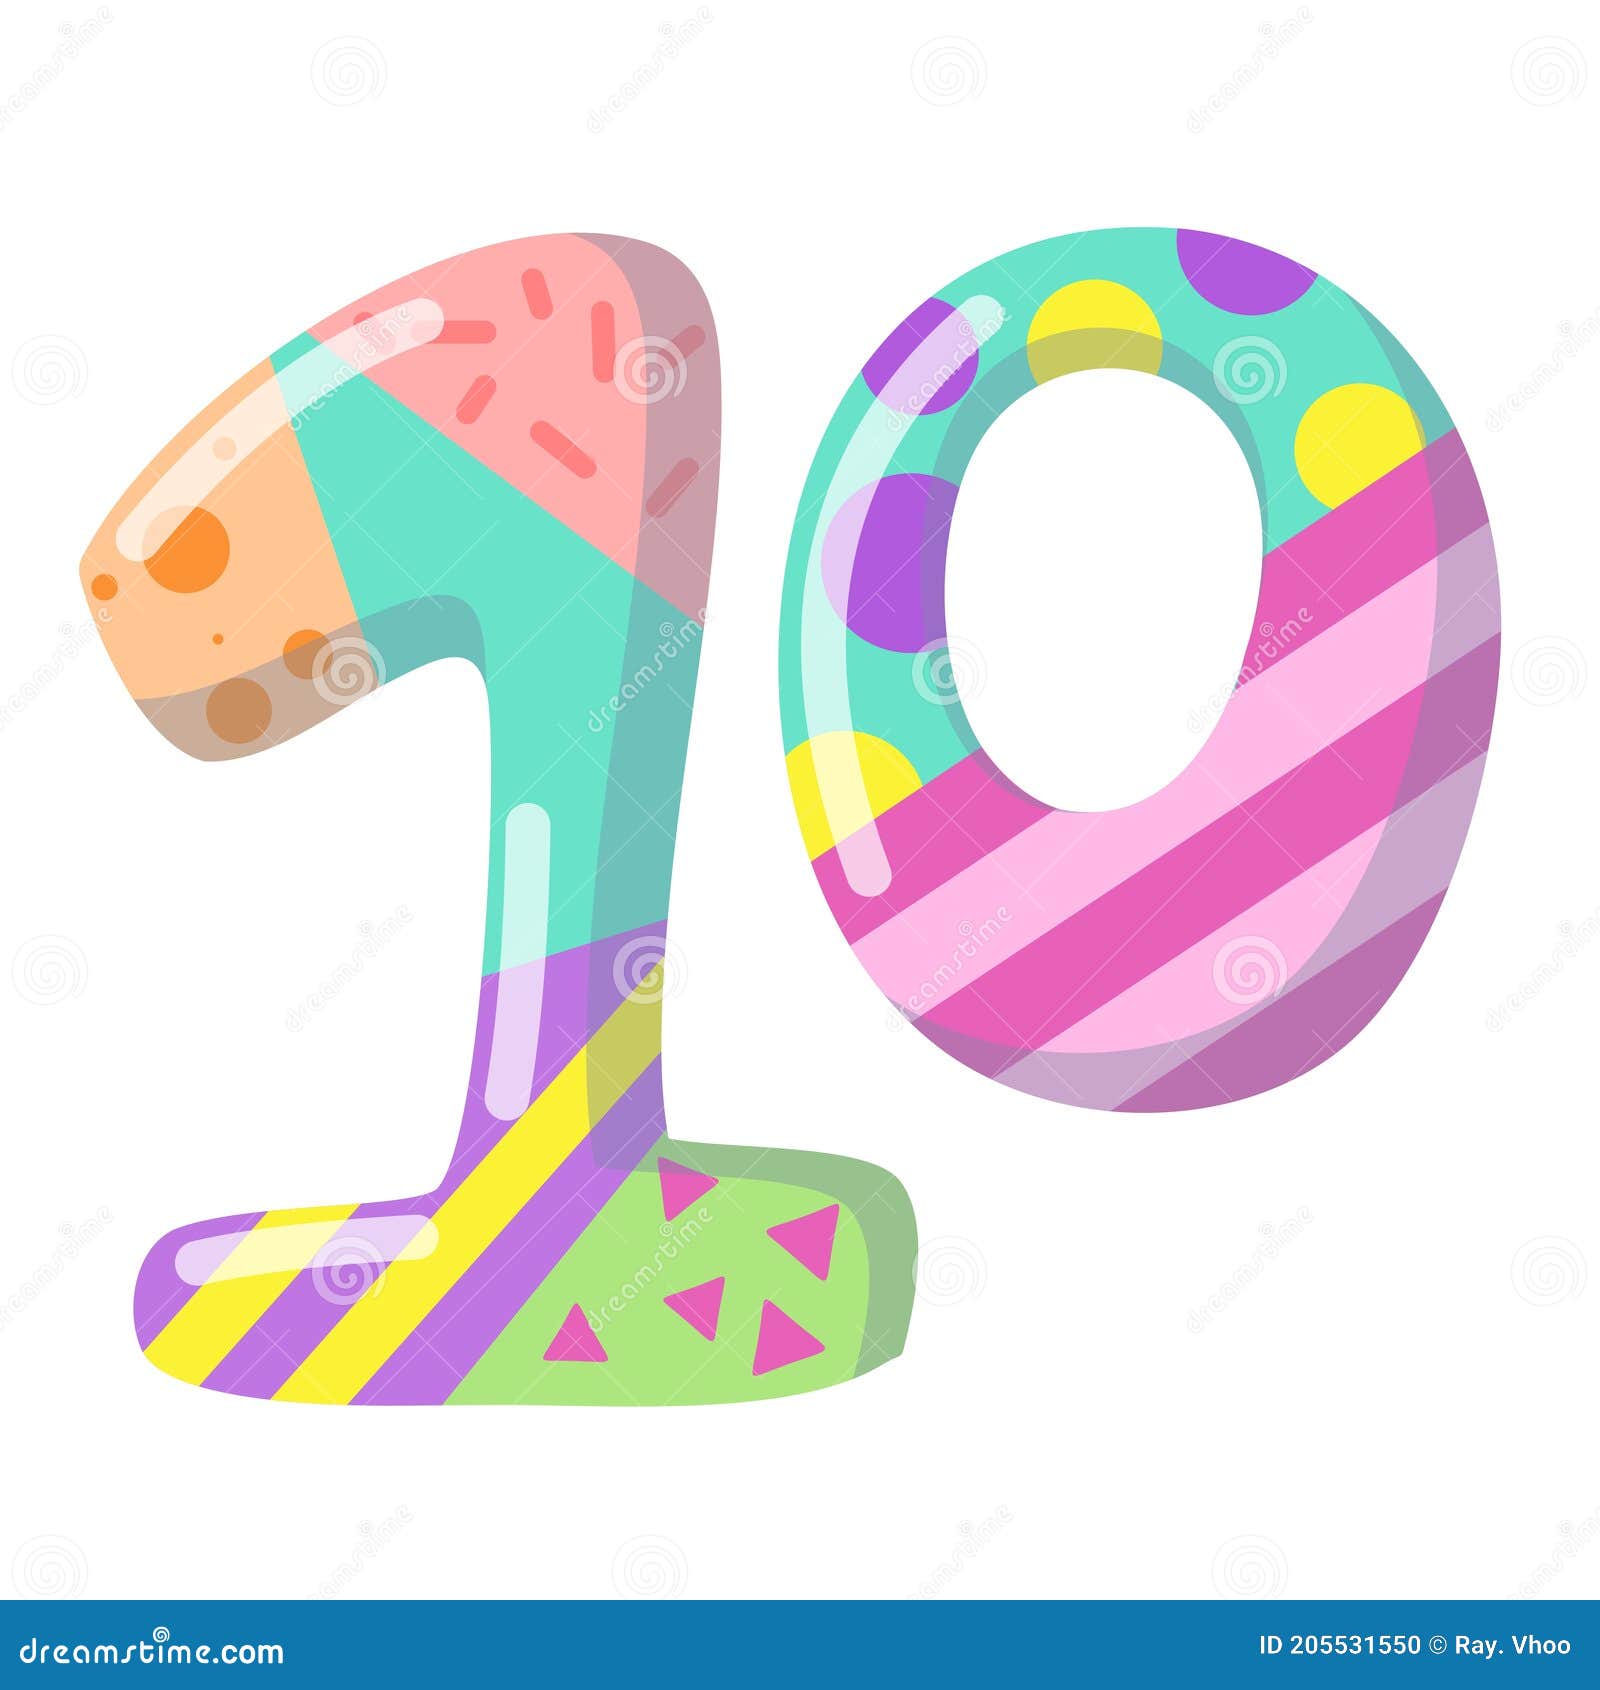 Design of Number Ten in a Soft Colour Background for Any Template and ...